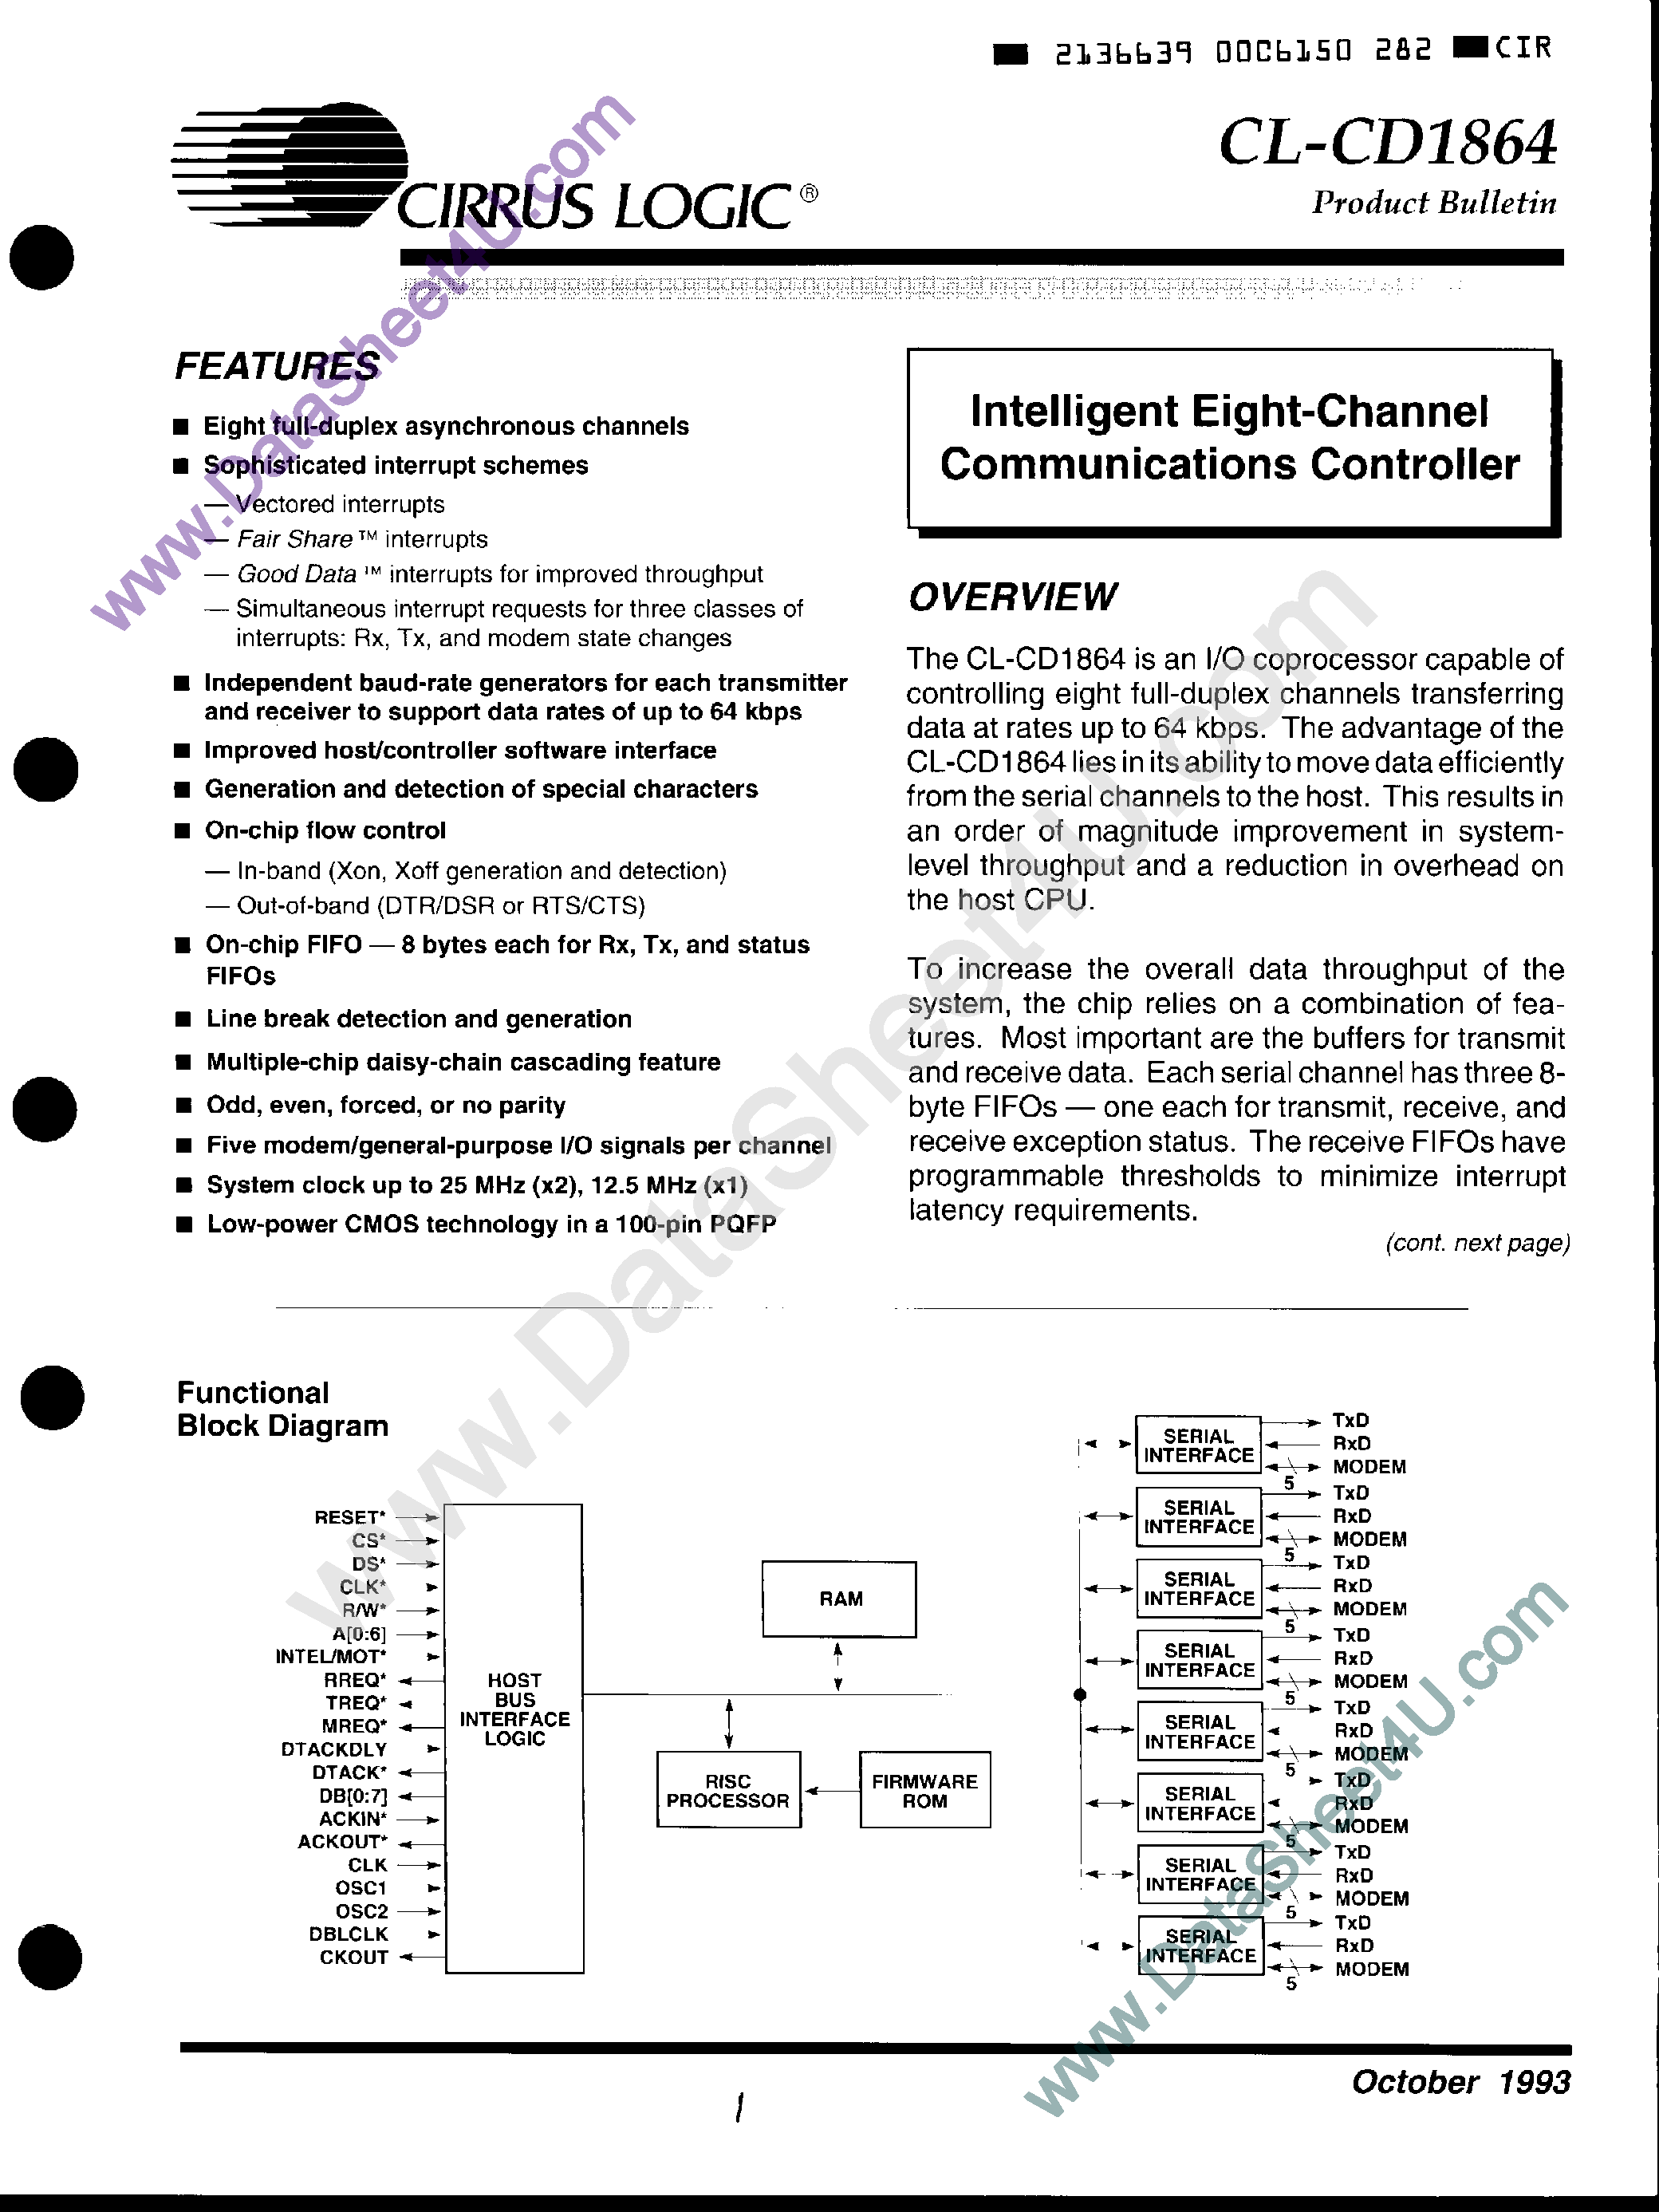 Datasheet CL-CD1864 - Intelligent 8-Channel Communications Controller page 1